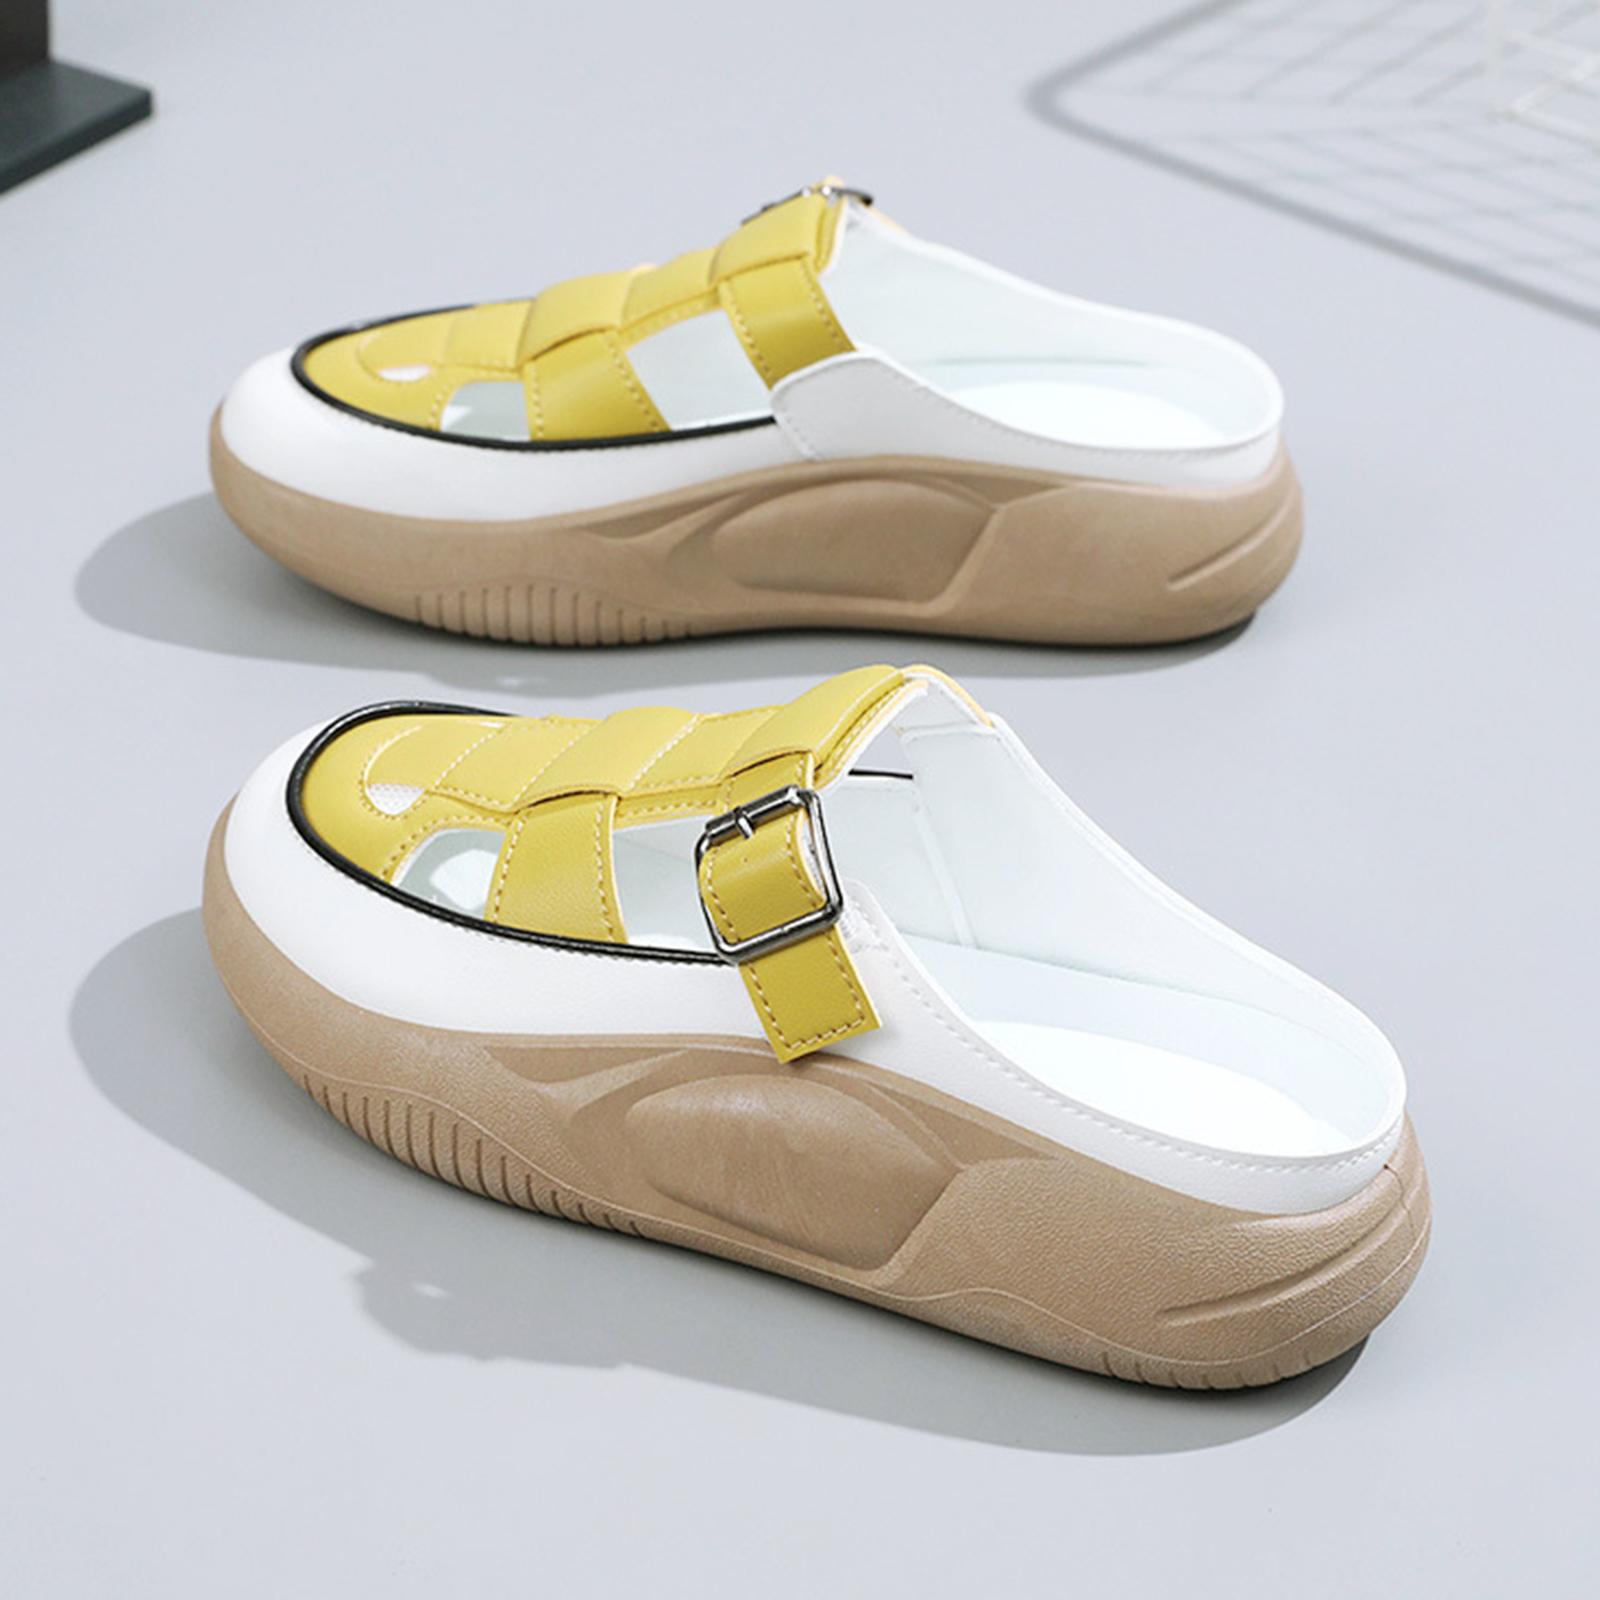 Women's Slide Sandals Comfortable Flat Shoes 5cm Thick Sole Nonslip Slippers Yellow 35